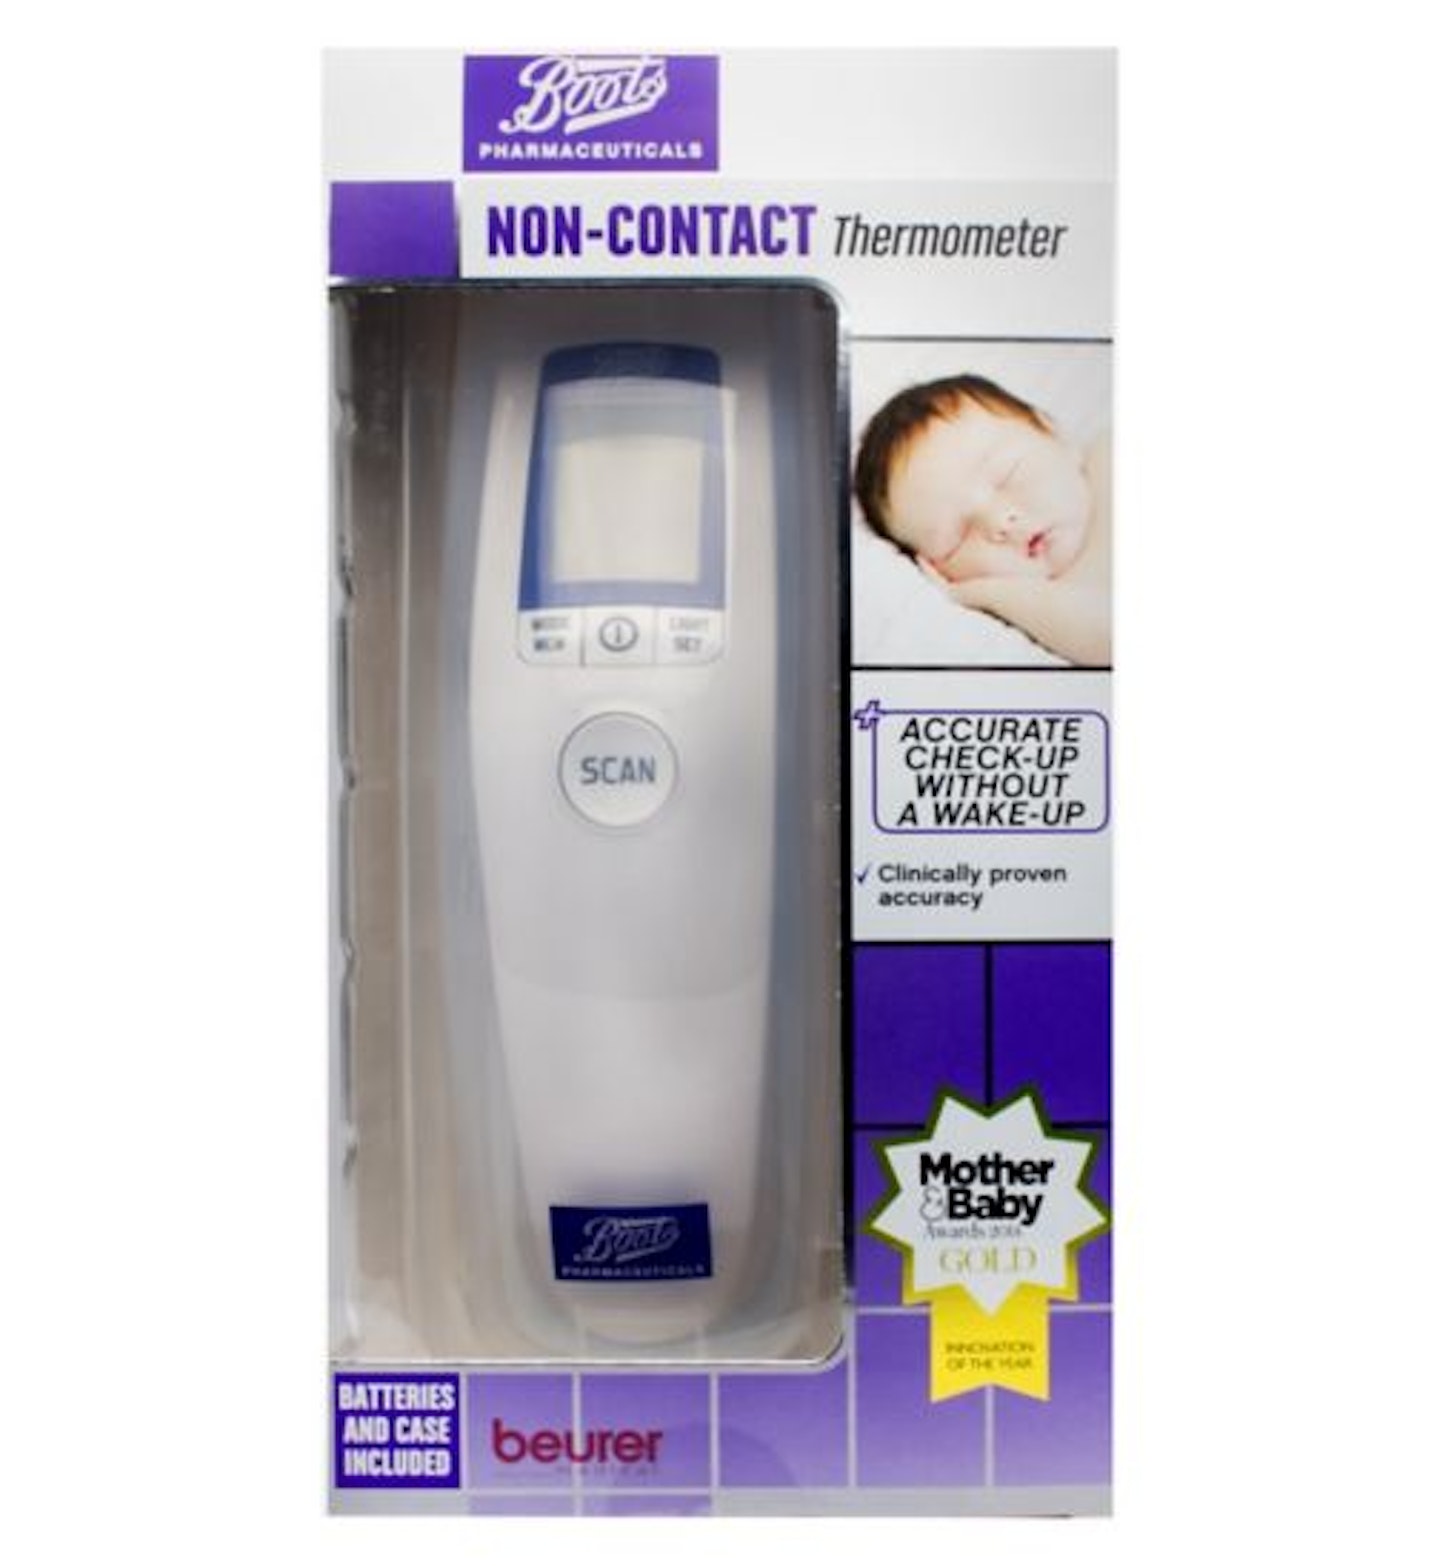 Boots Non-contact Thermometer